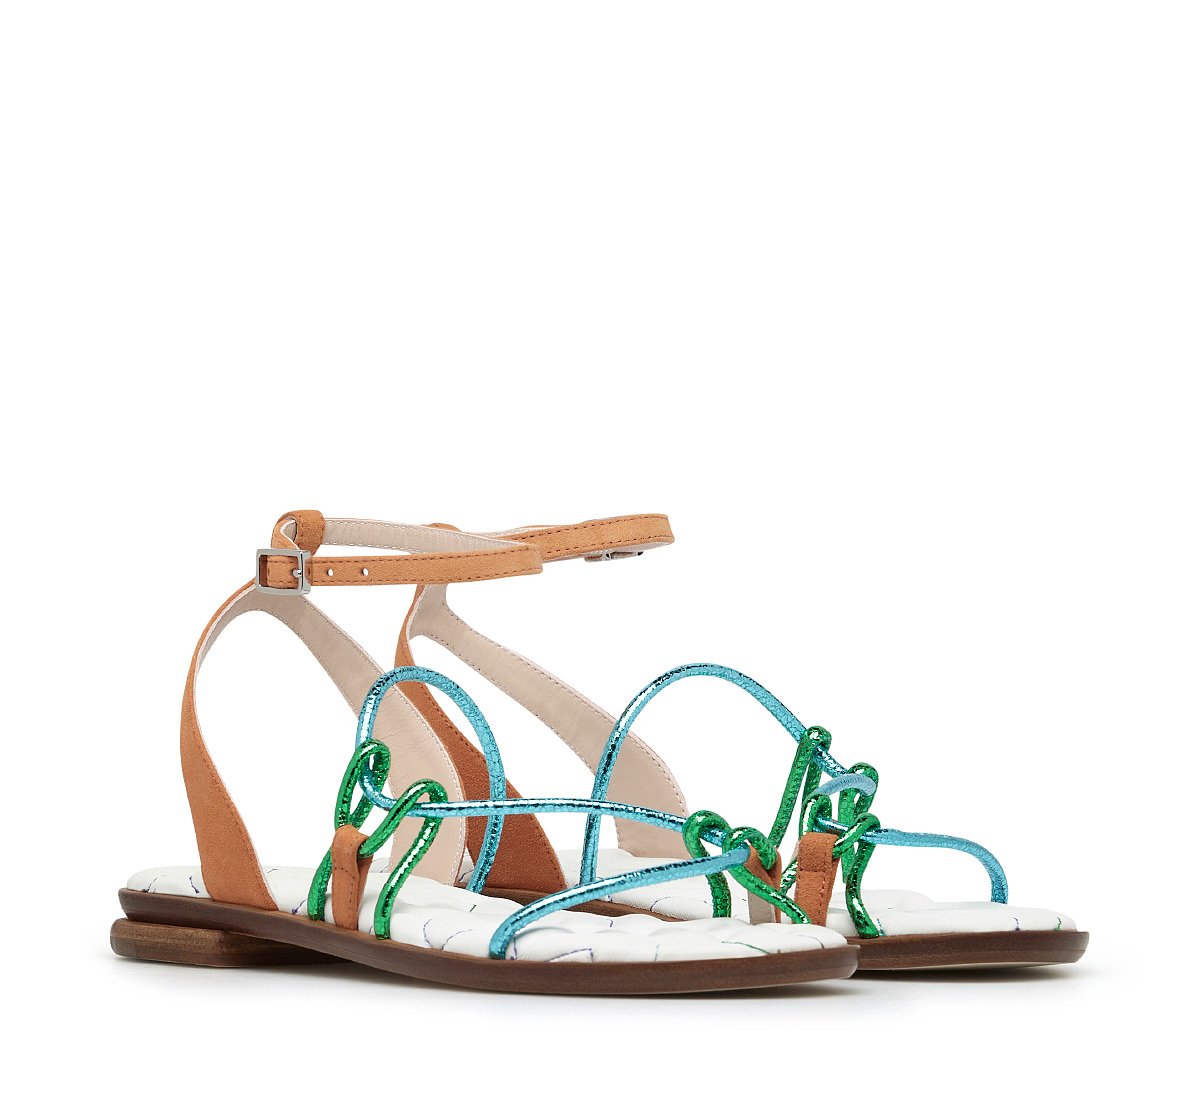 Sandals with laminated details